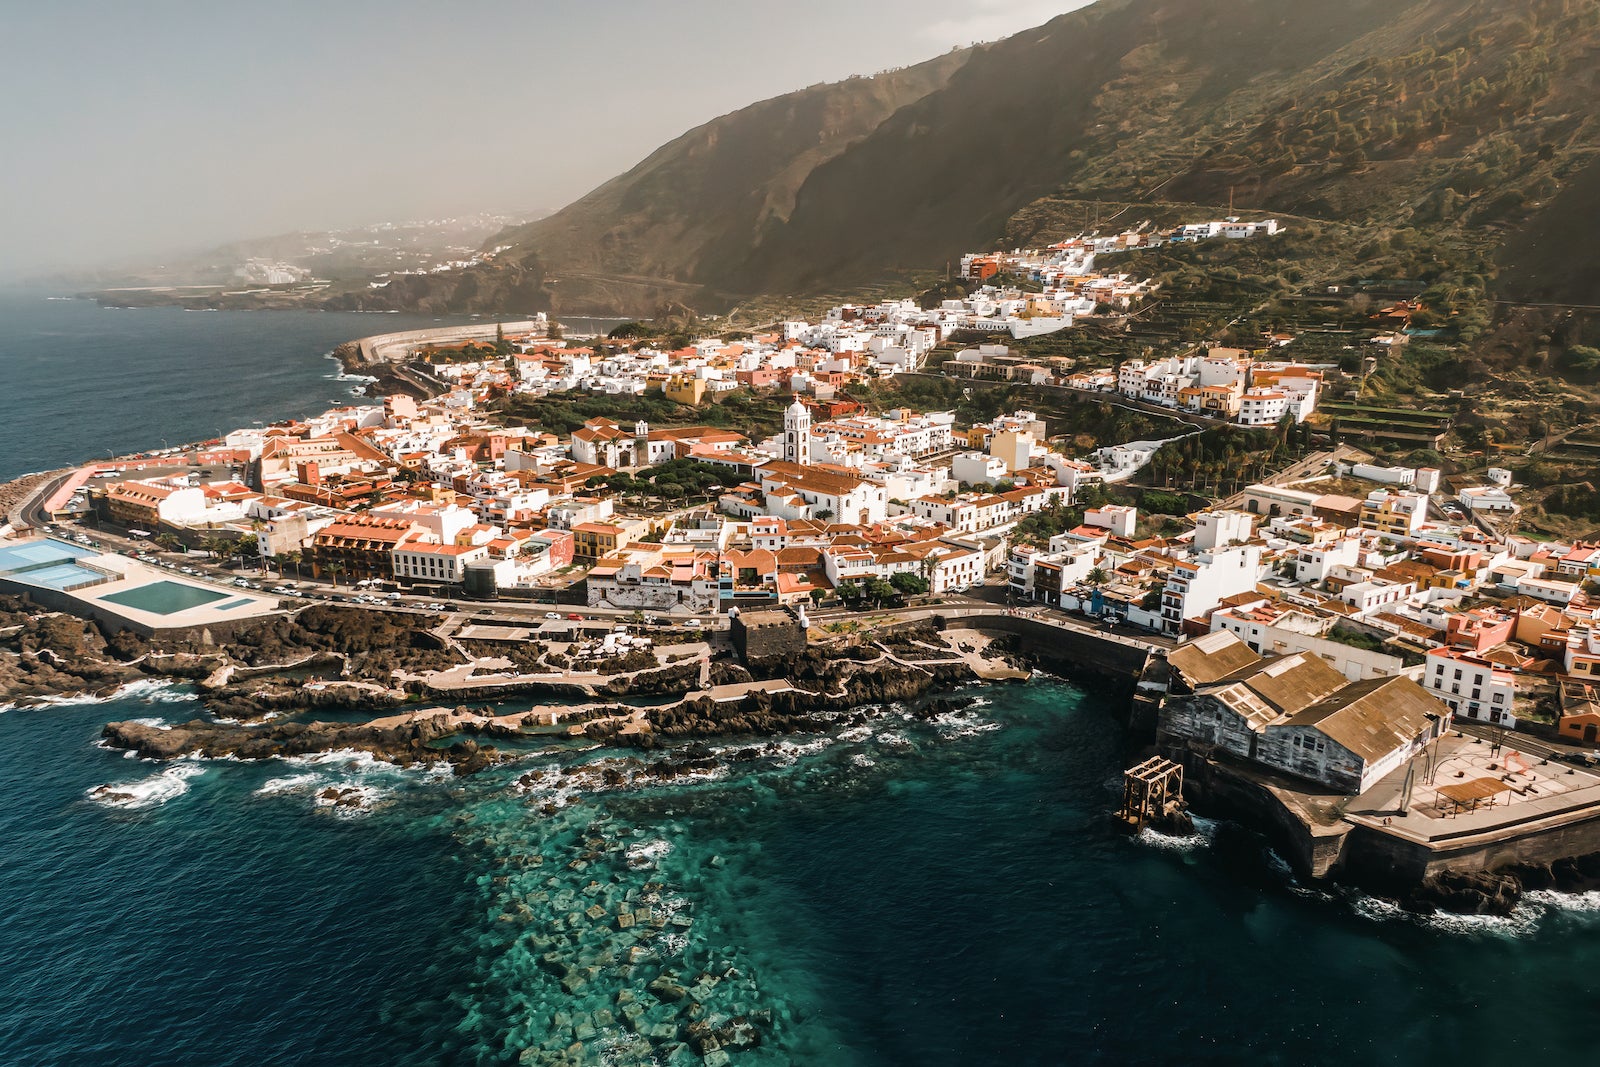 Arial view of Tenerife, Canary Islands